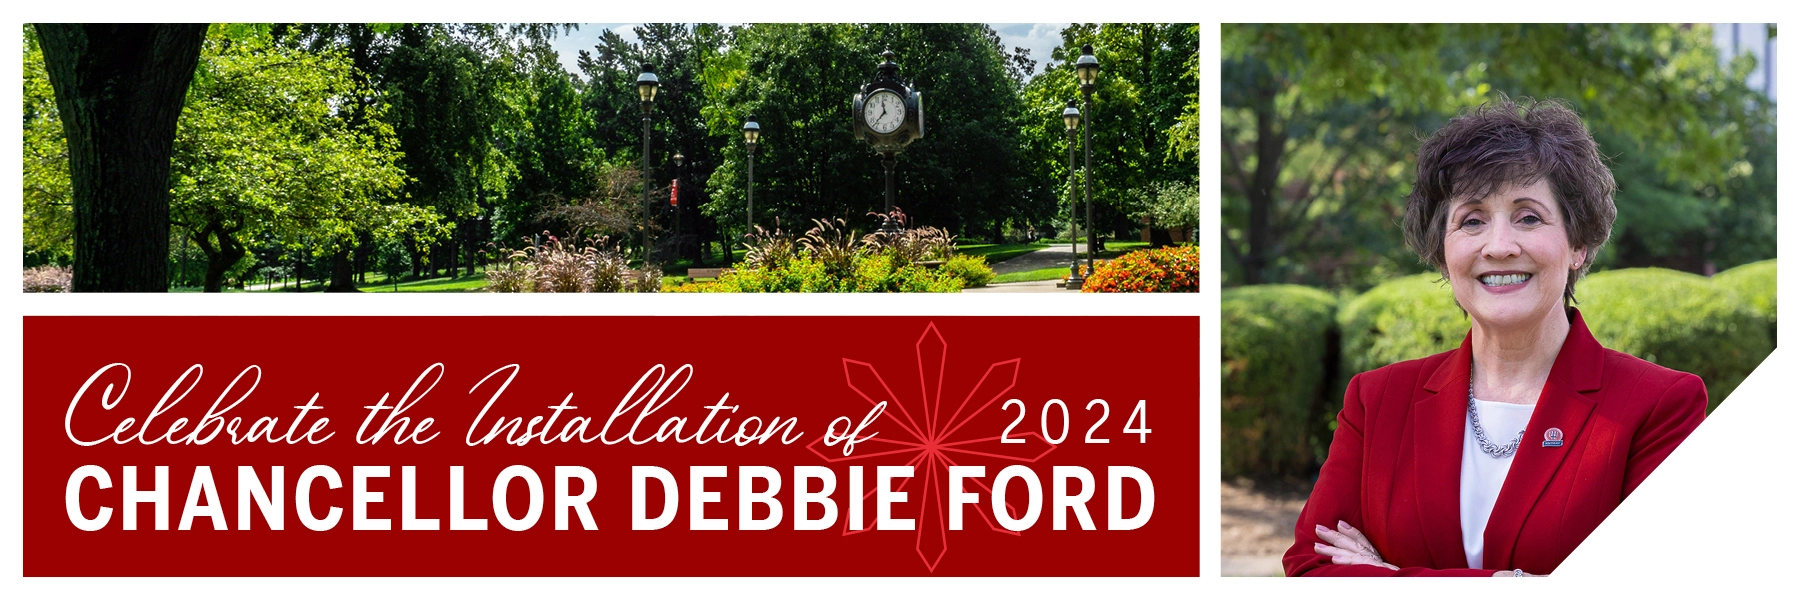 Celebrate the Installation of Chancellor Debbie Ford 2024